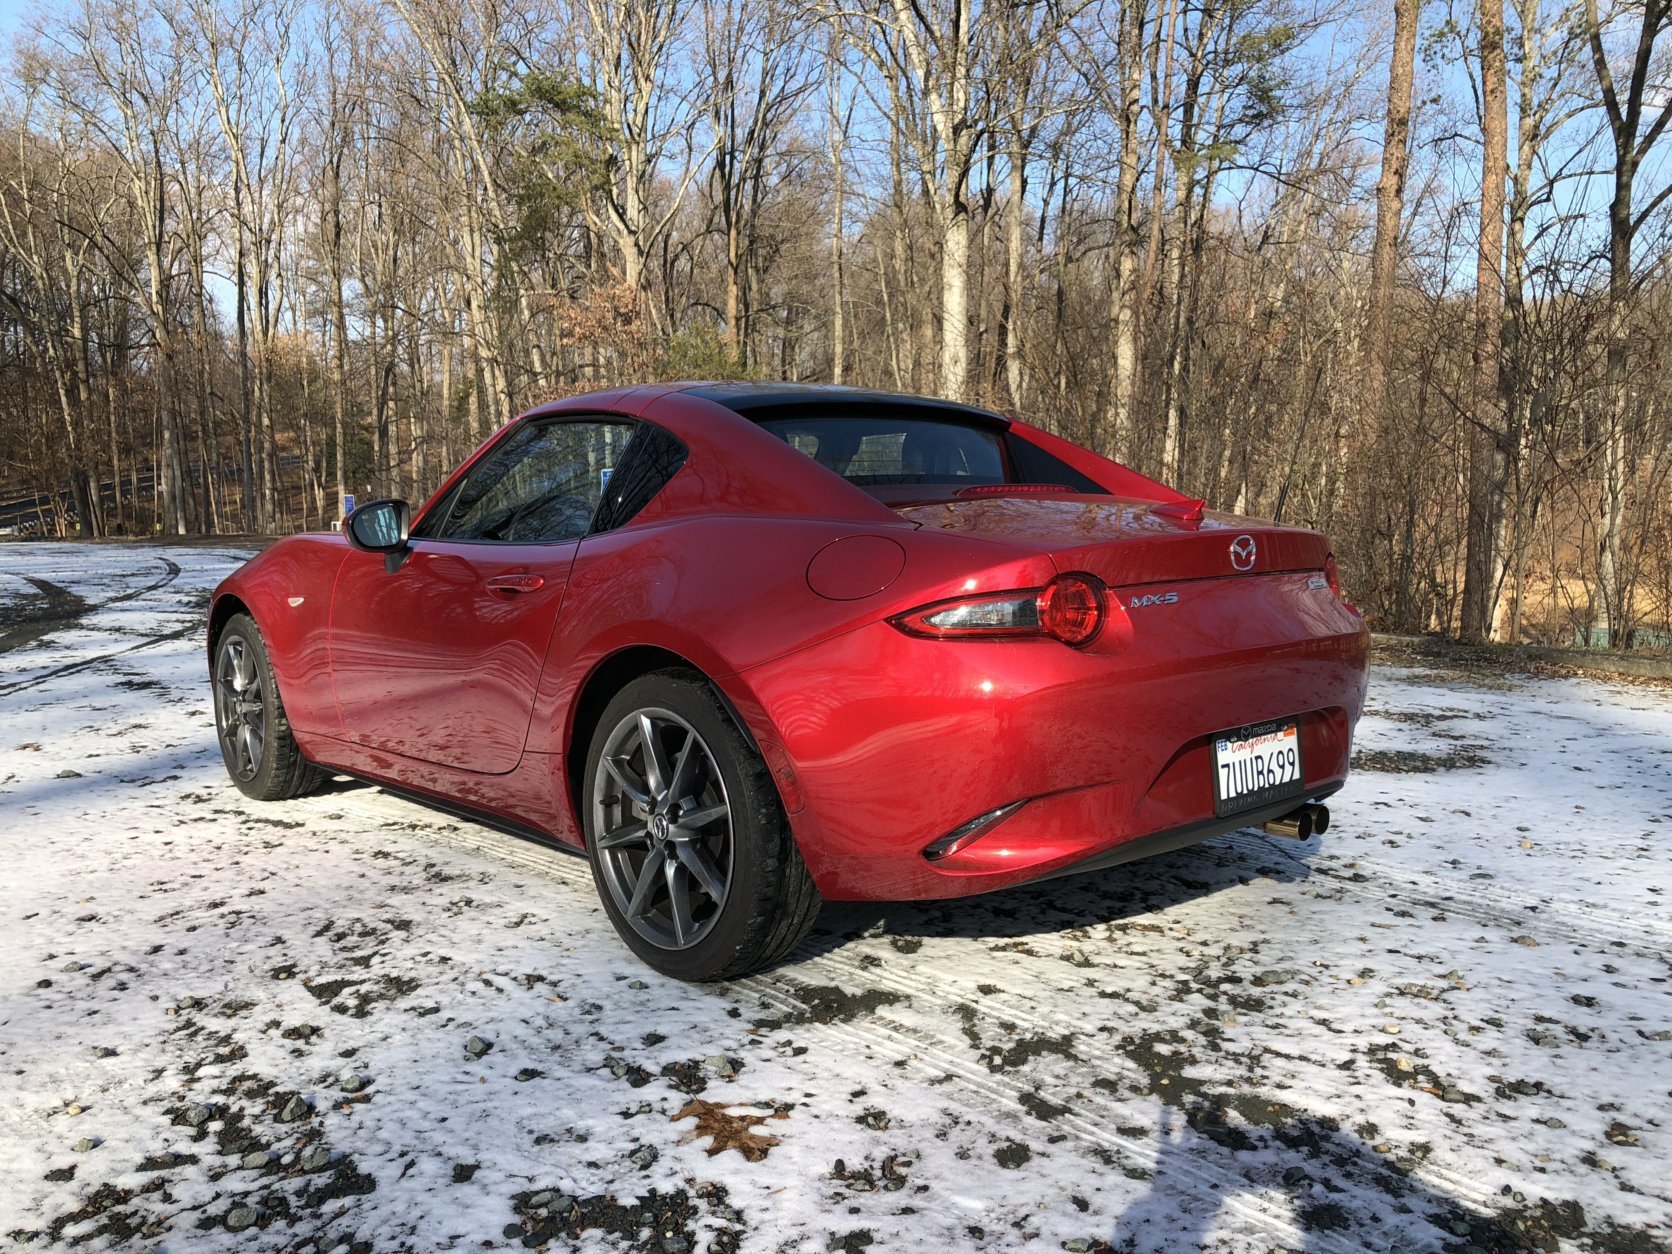 The rear body structure for the roof above the rear fender gives the hard top Miata an aggressive sculpted body that stretches to the edges above the rear wheel arches. (WTOP/Mike Parris)